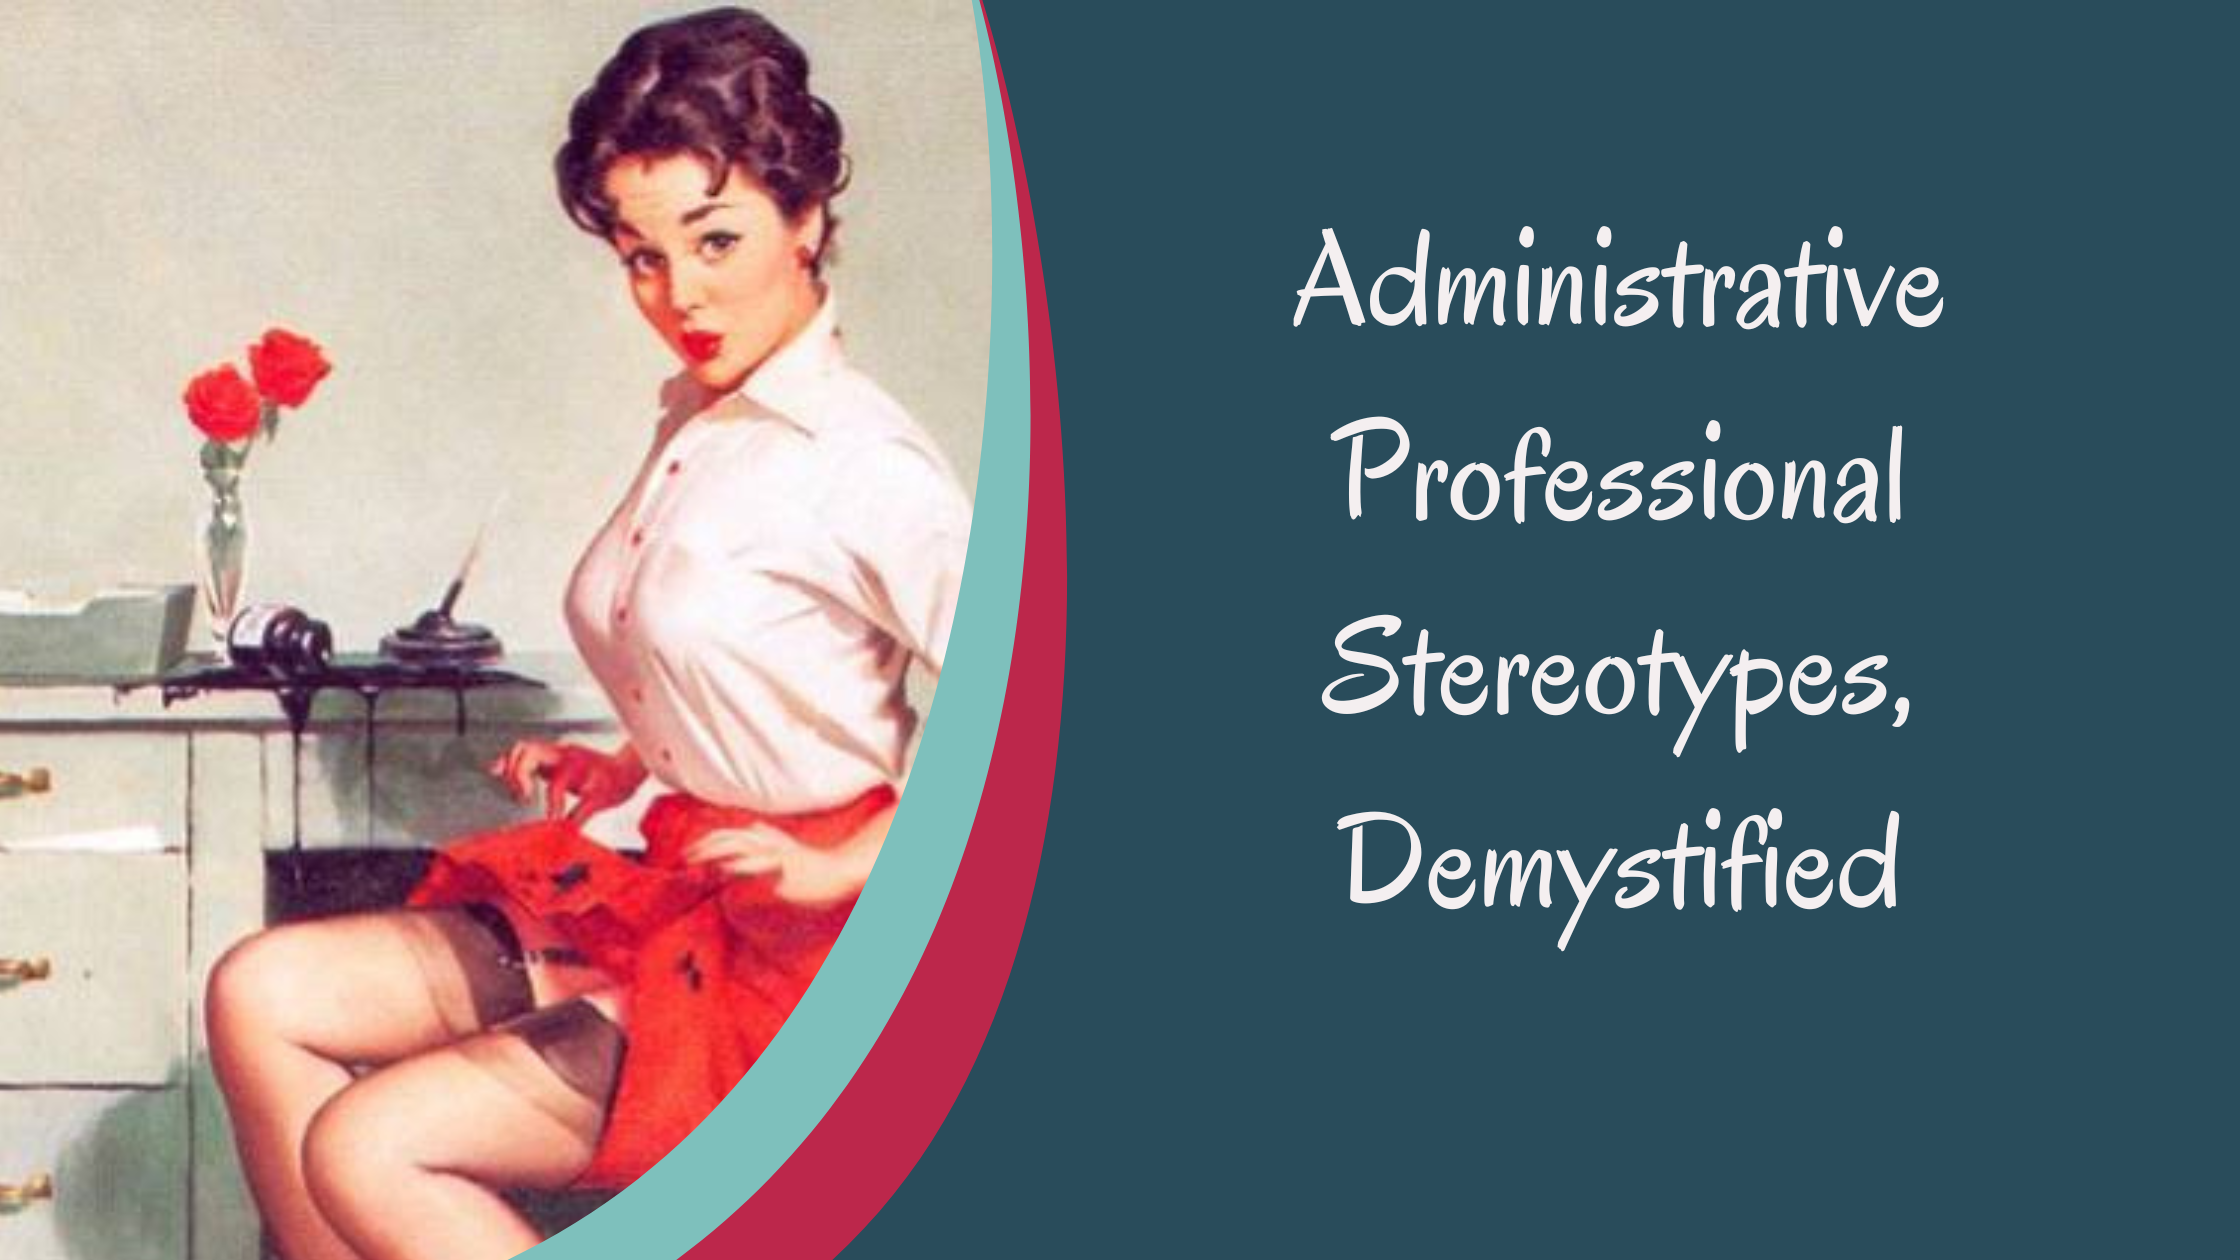 Admin Prof Stereotypes Demystified